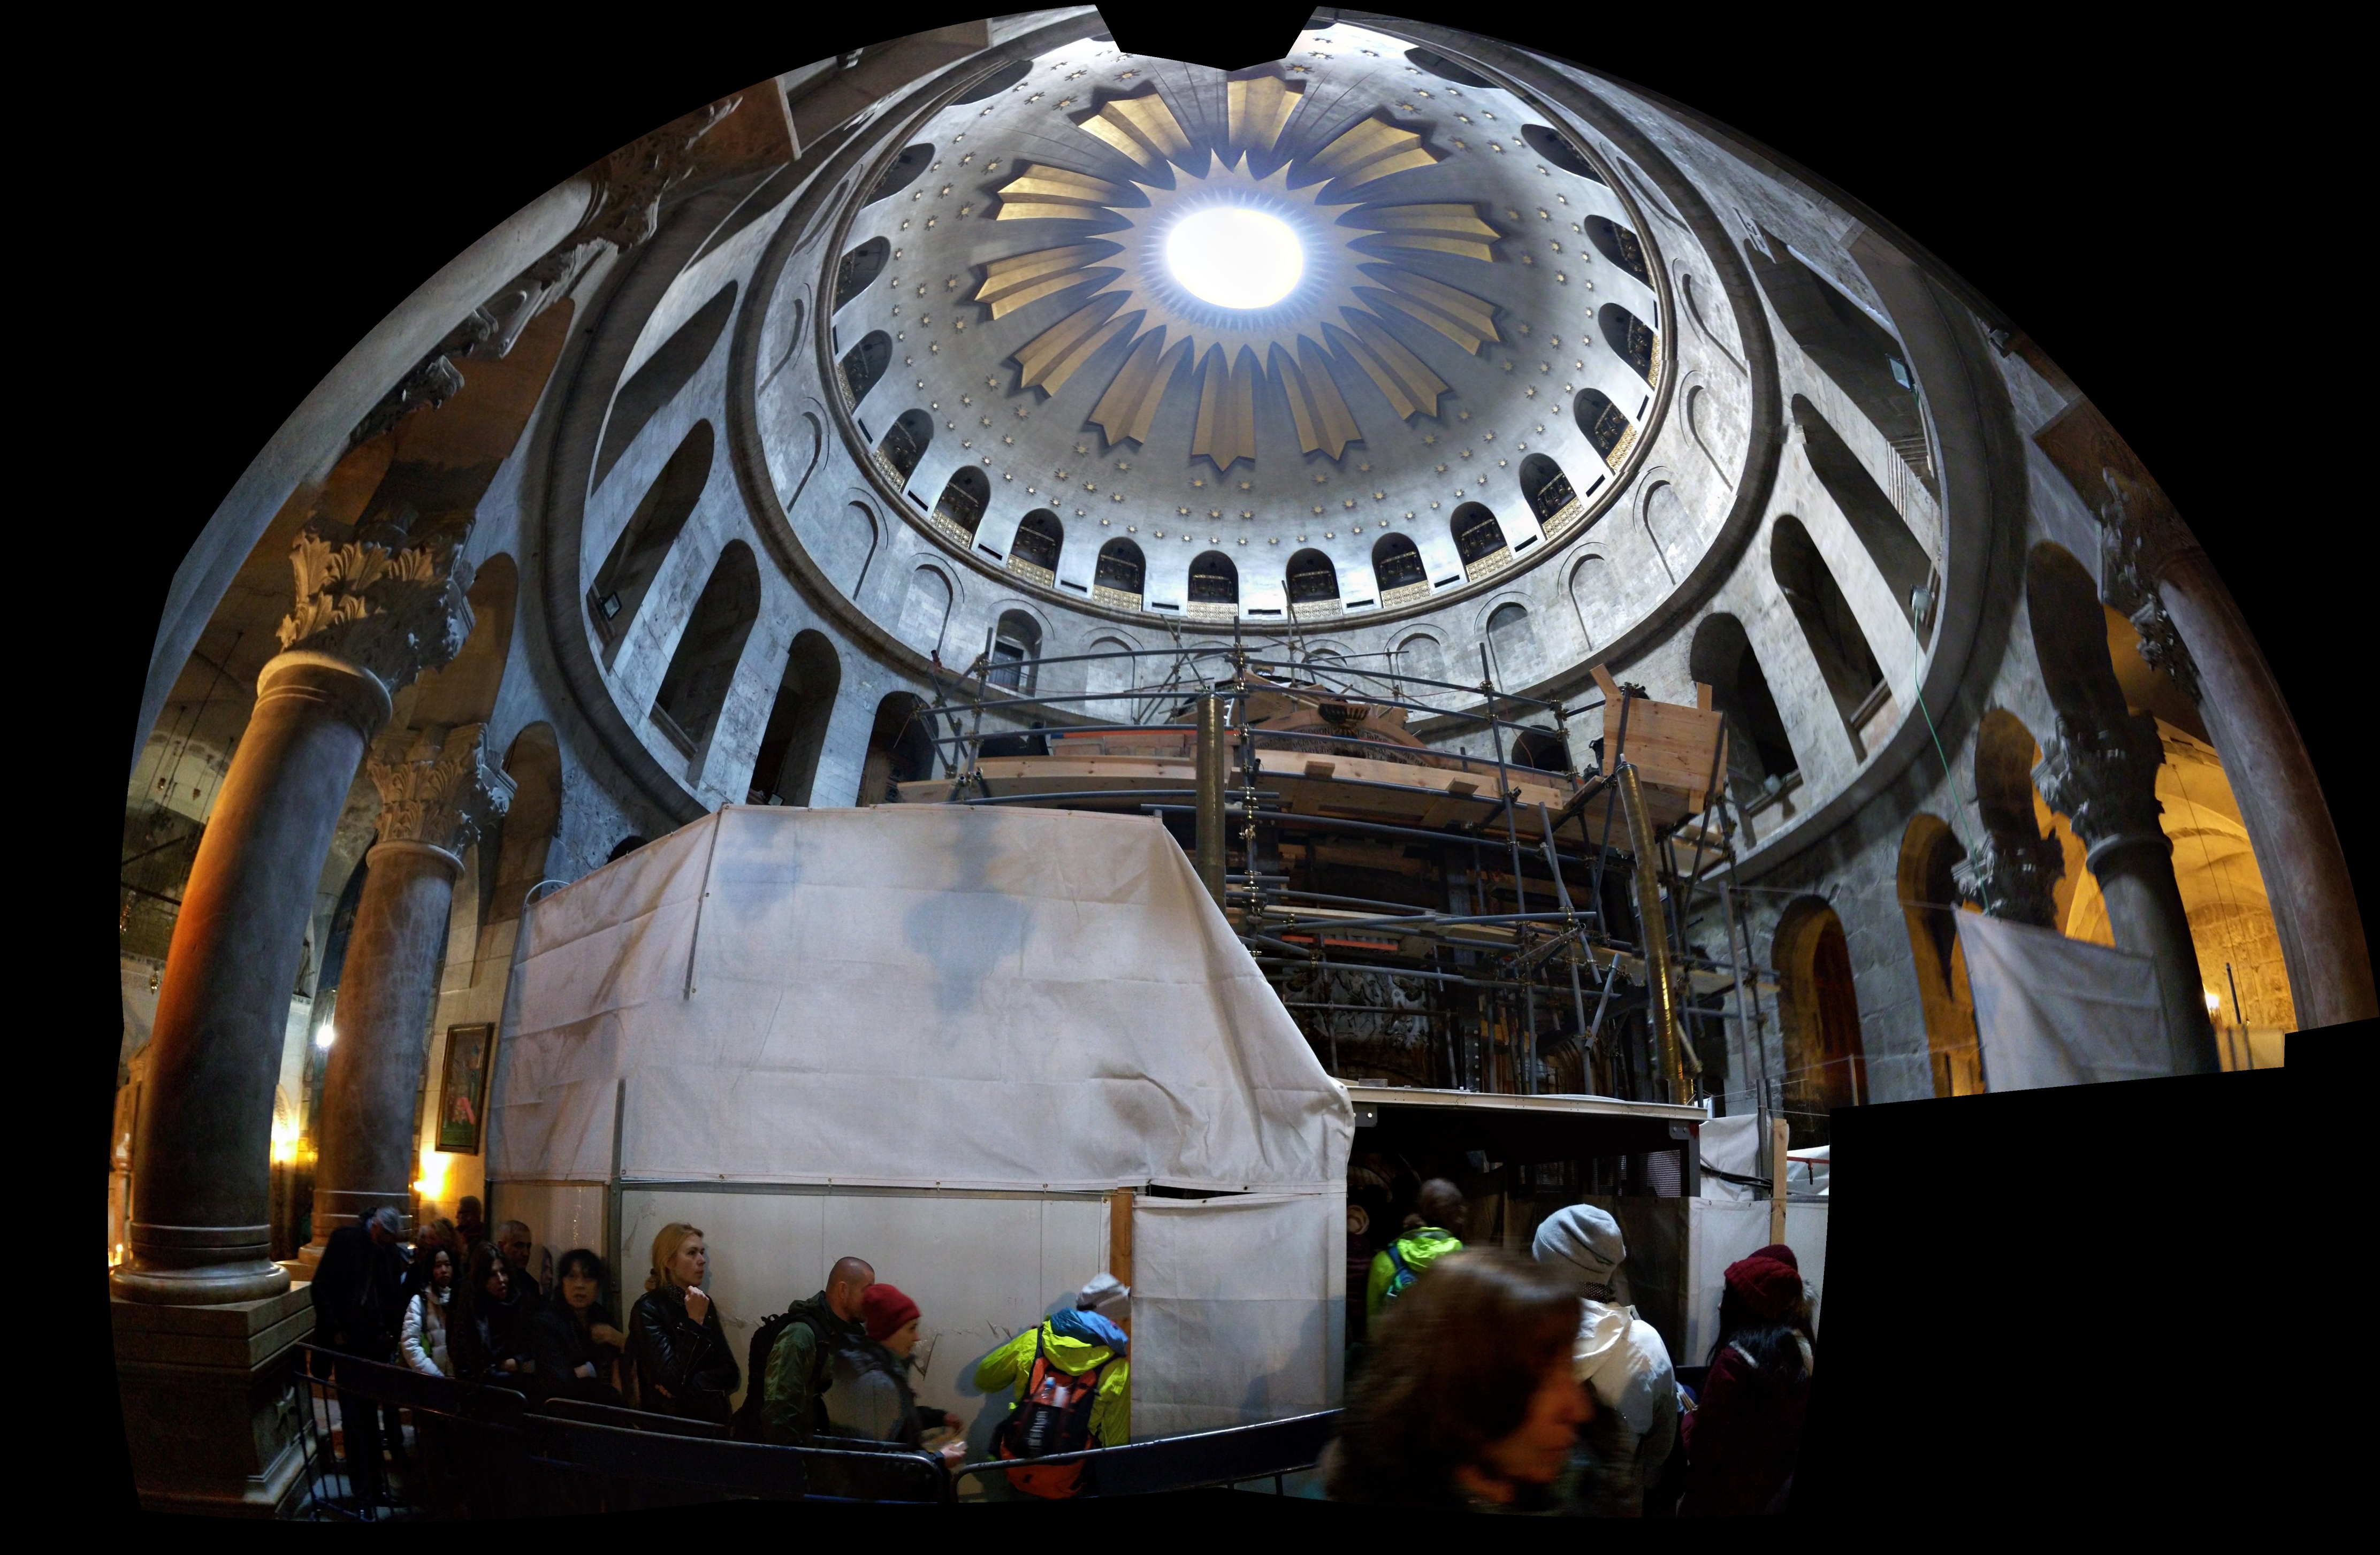 Ceremony at the Church of the Holy Sepulchre: Completion of Rotunda Restoration